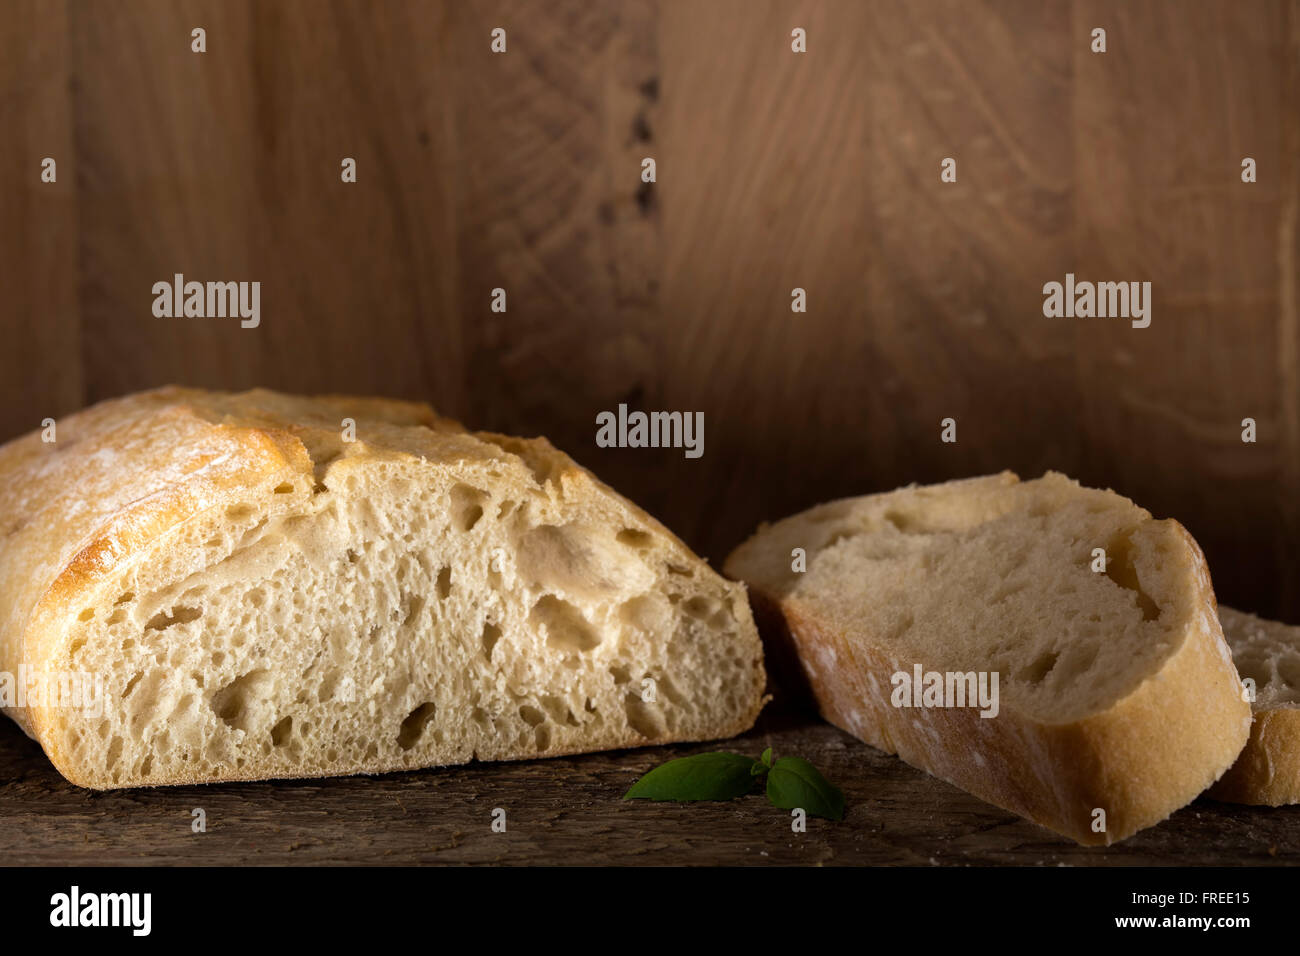 Sliced bread on a wooden background with copy space Stock Photo